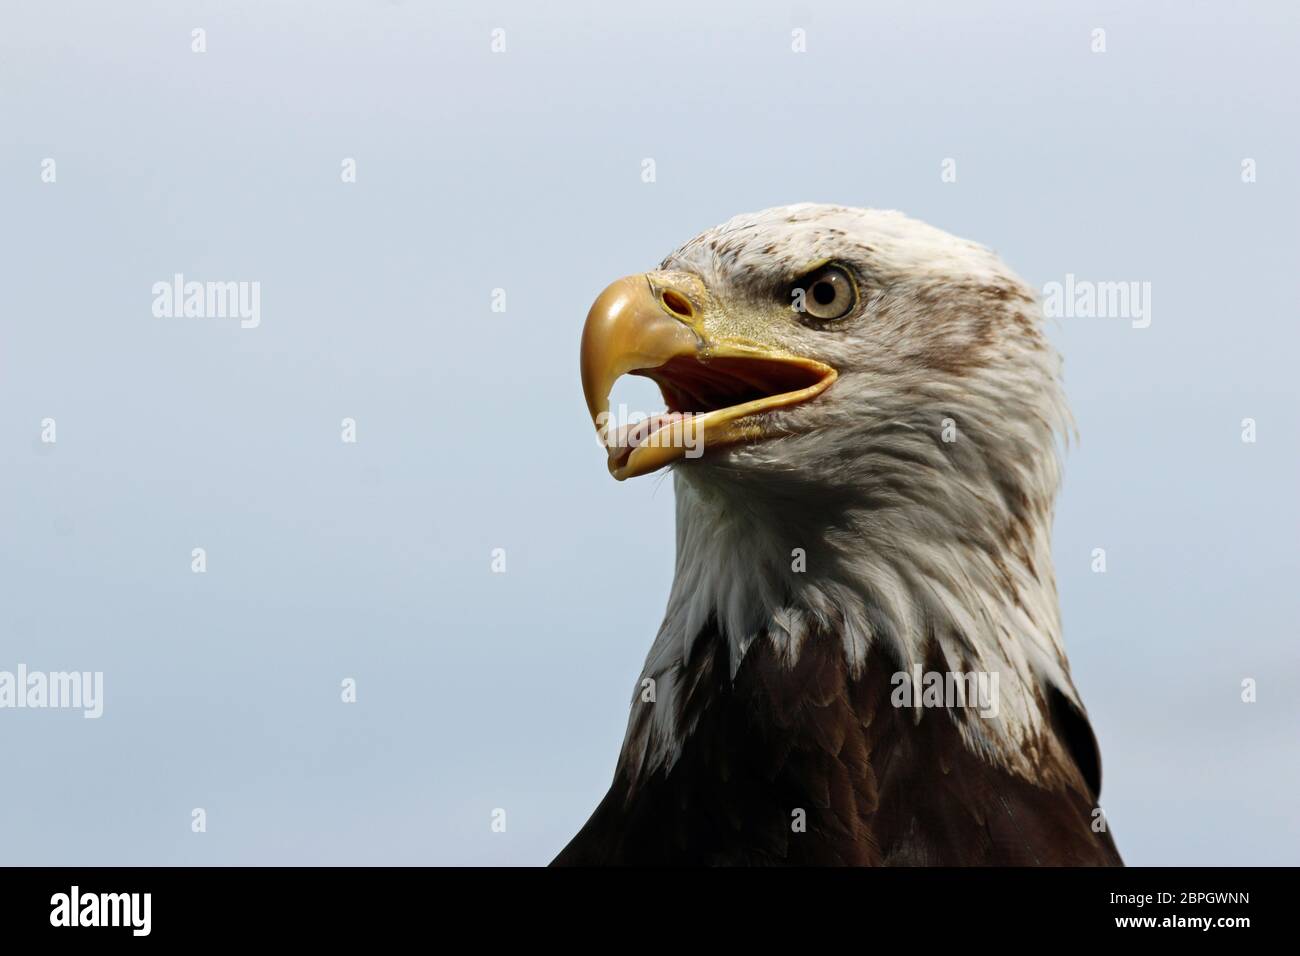 Head and shoulders of a sub-adult American bald eagle (Haliaeetus leucocephalus) facing left with a blue grey sky background. Stock Photo